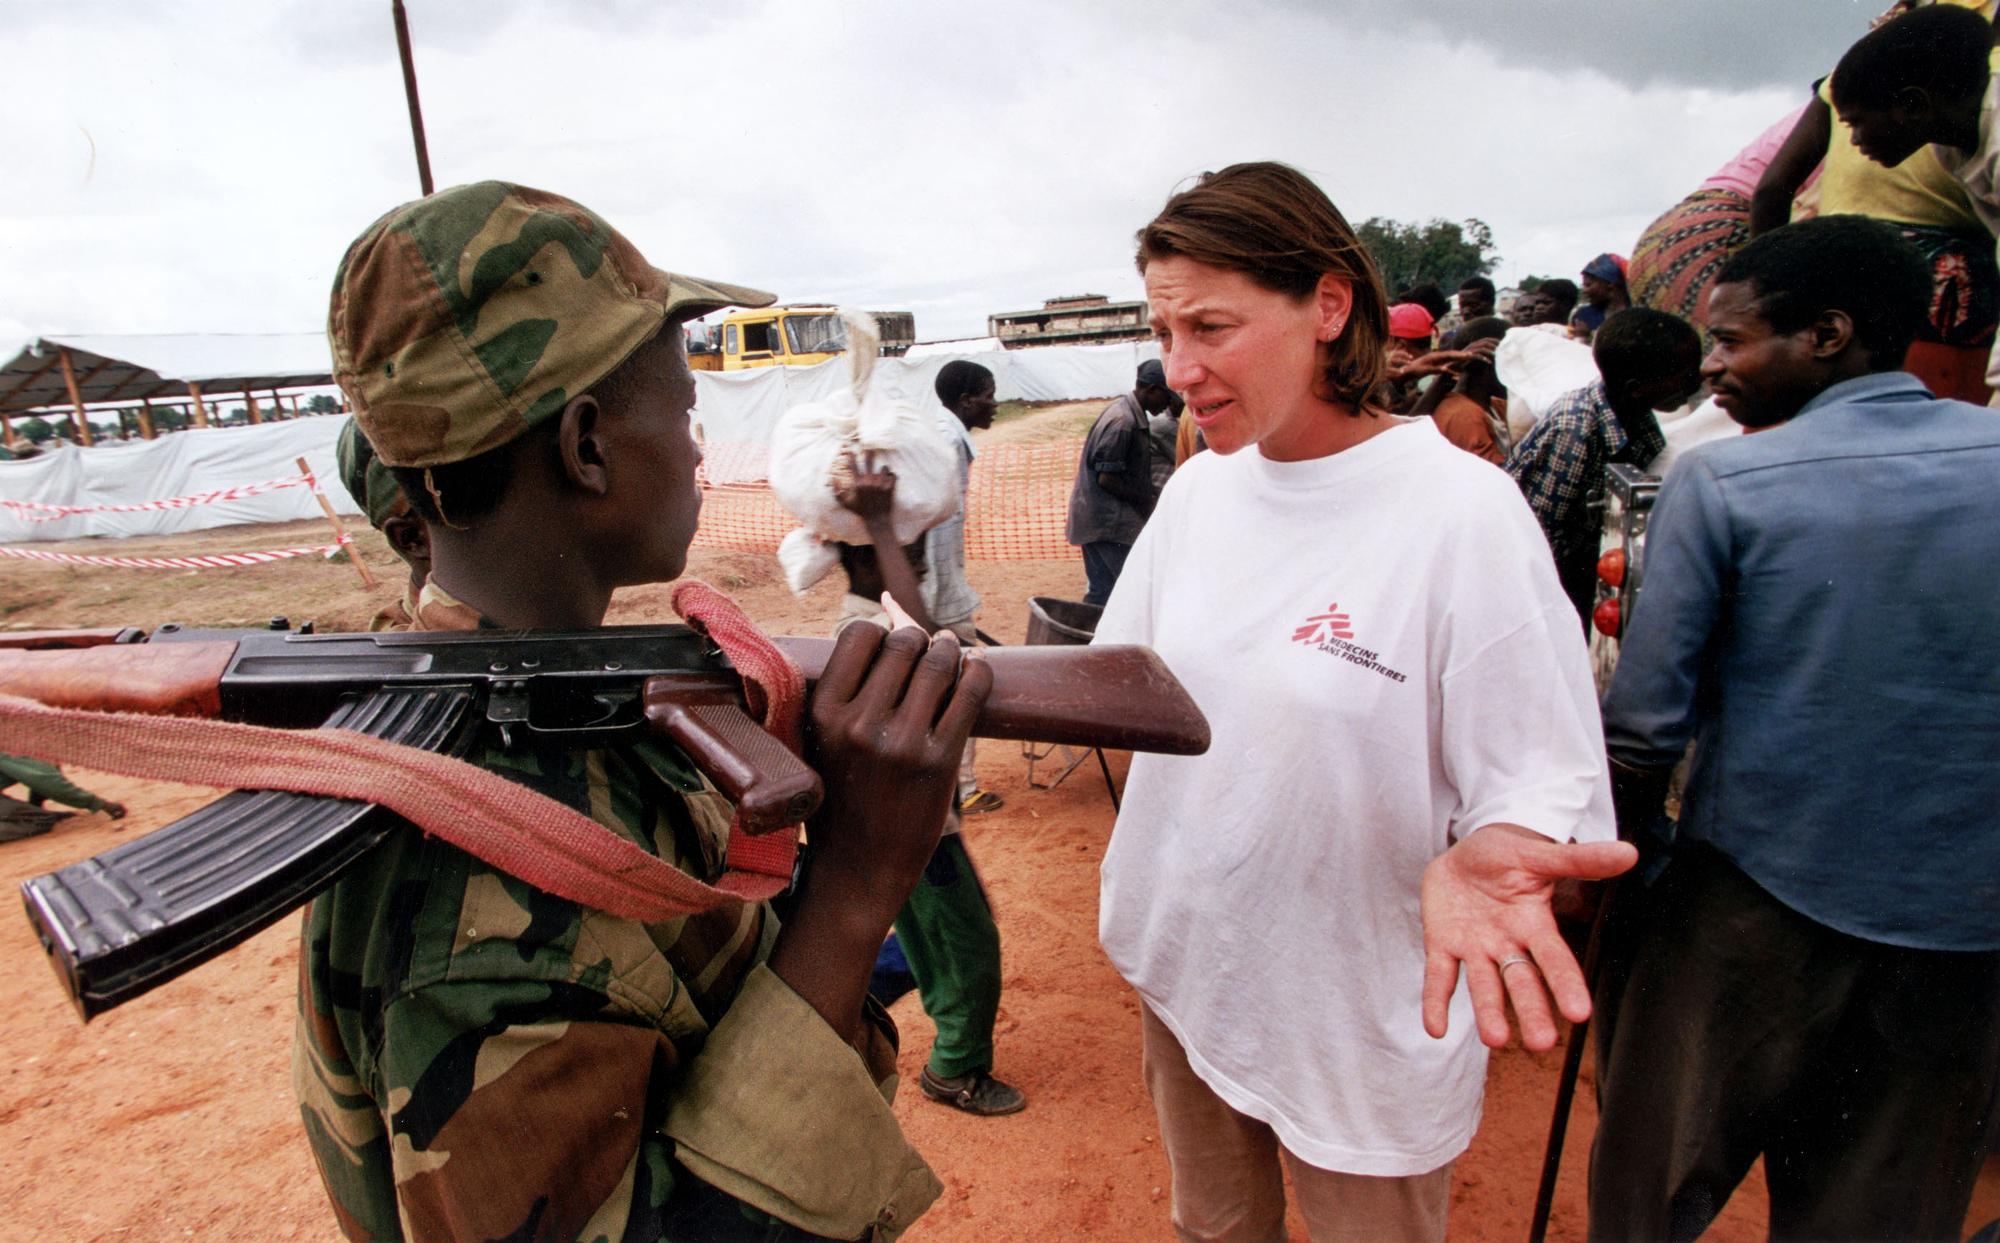 An MSF worker talks to an armed soldier in front of a line of people.